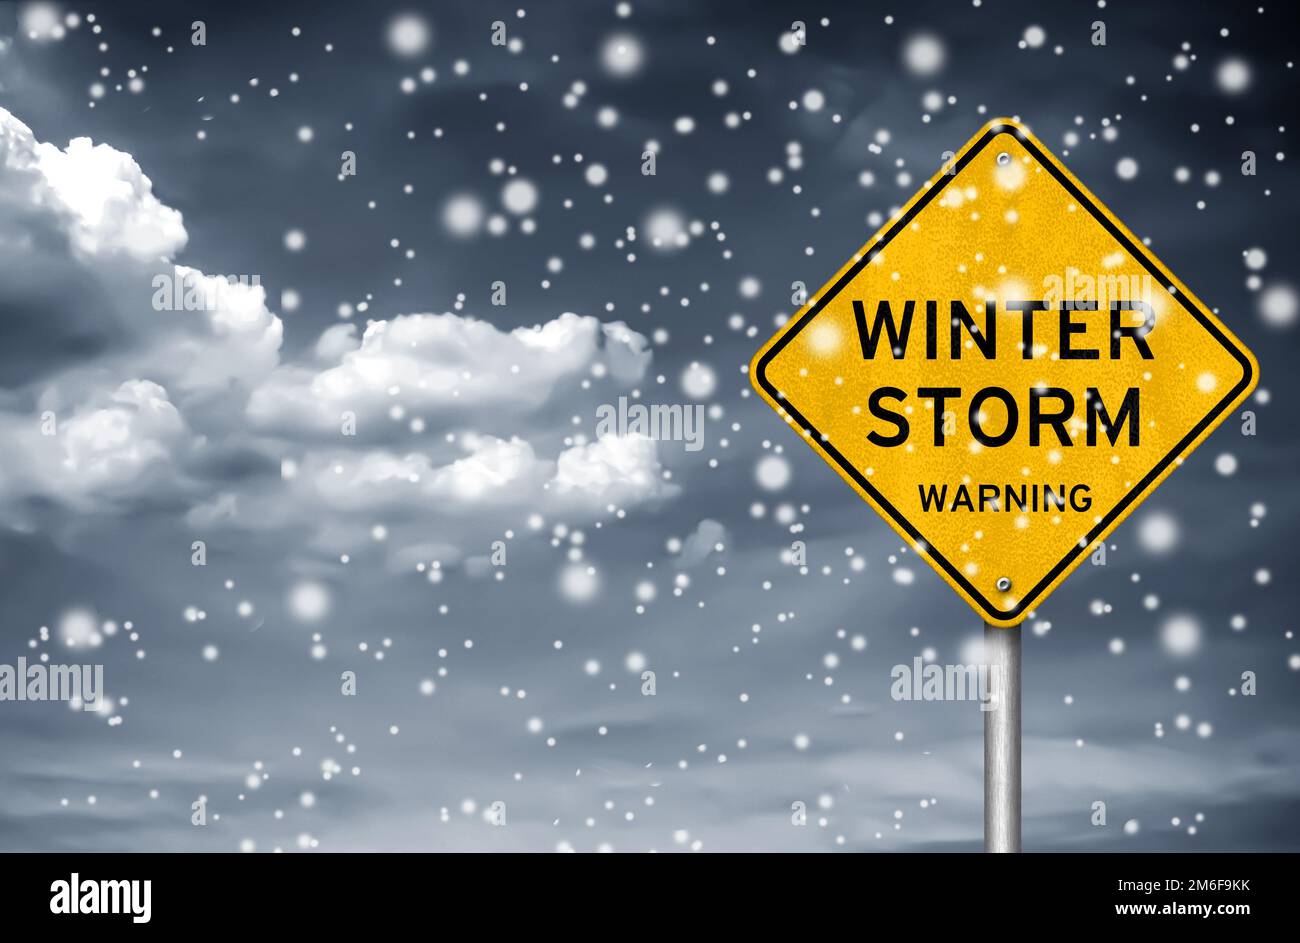 Winter Storm warning - road sign information Stock Photo